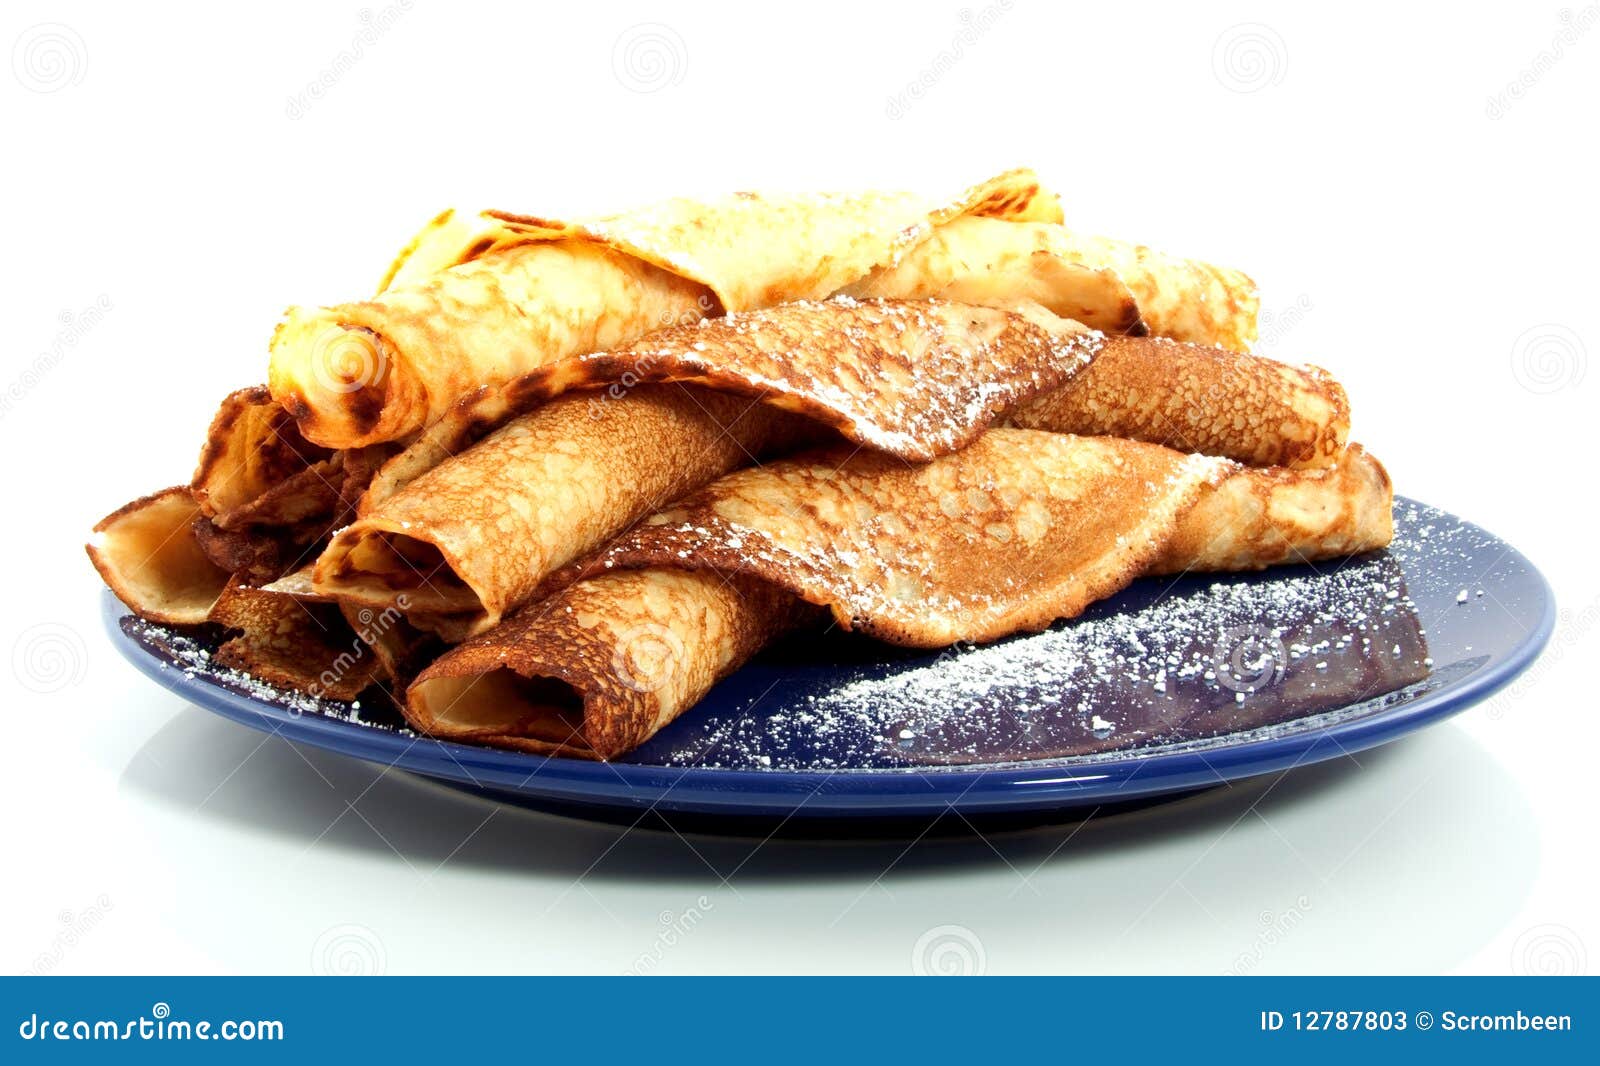 many baked rolled pancakes